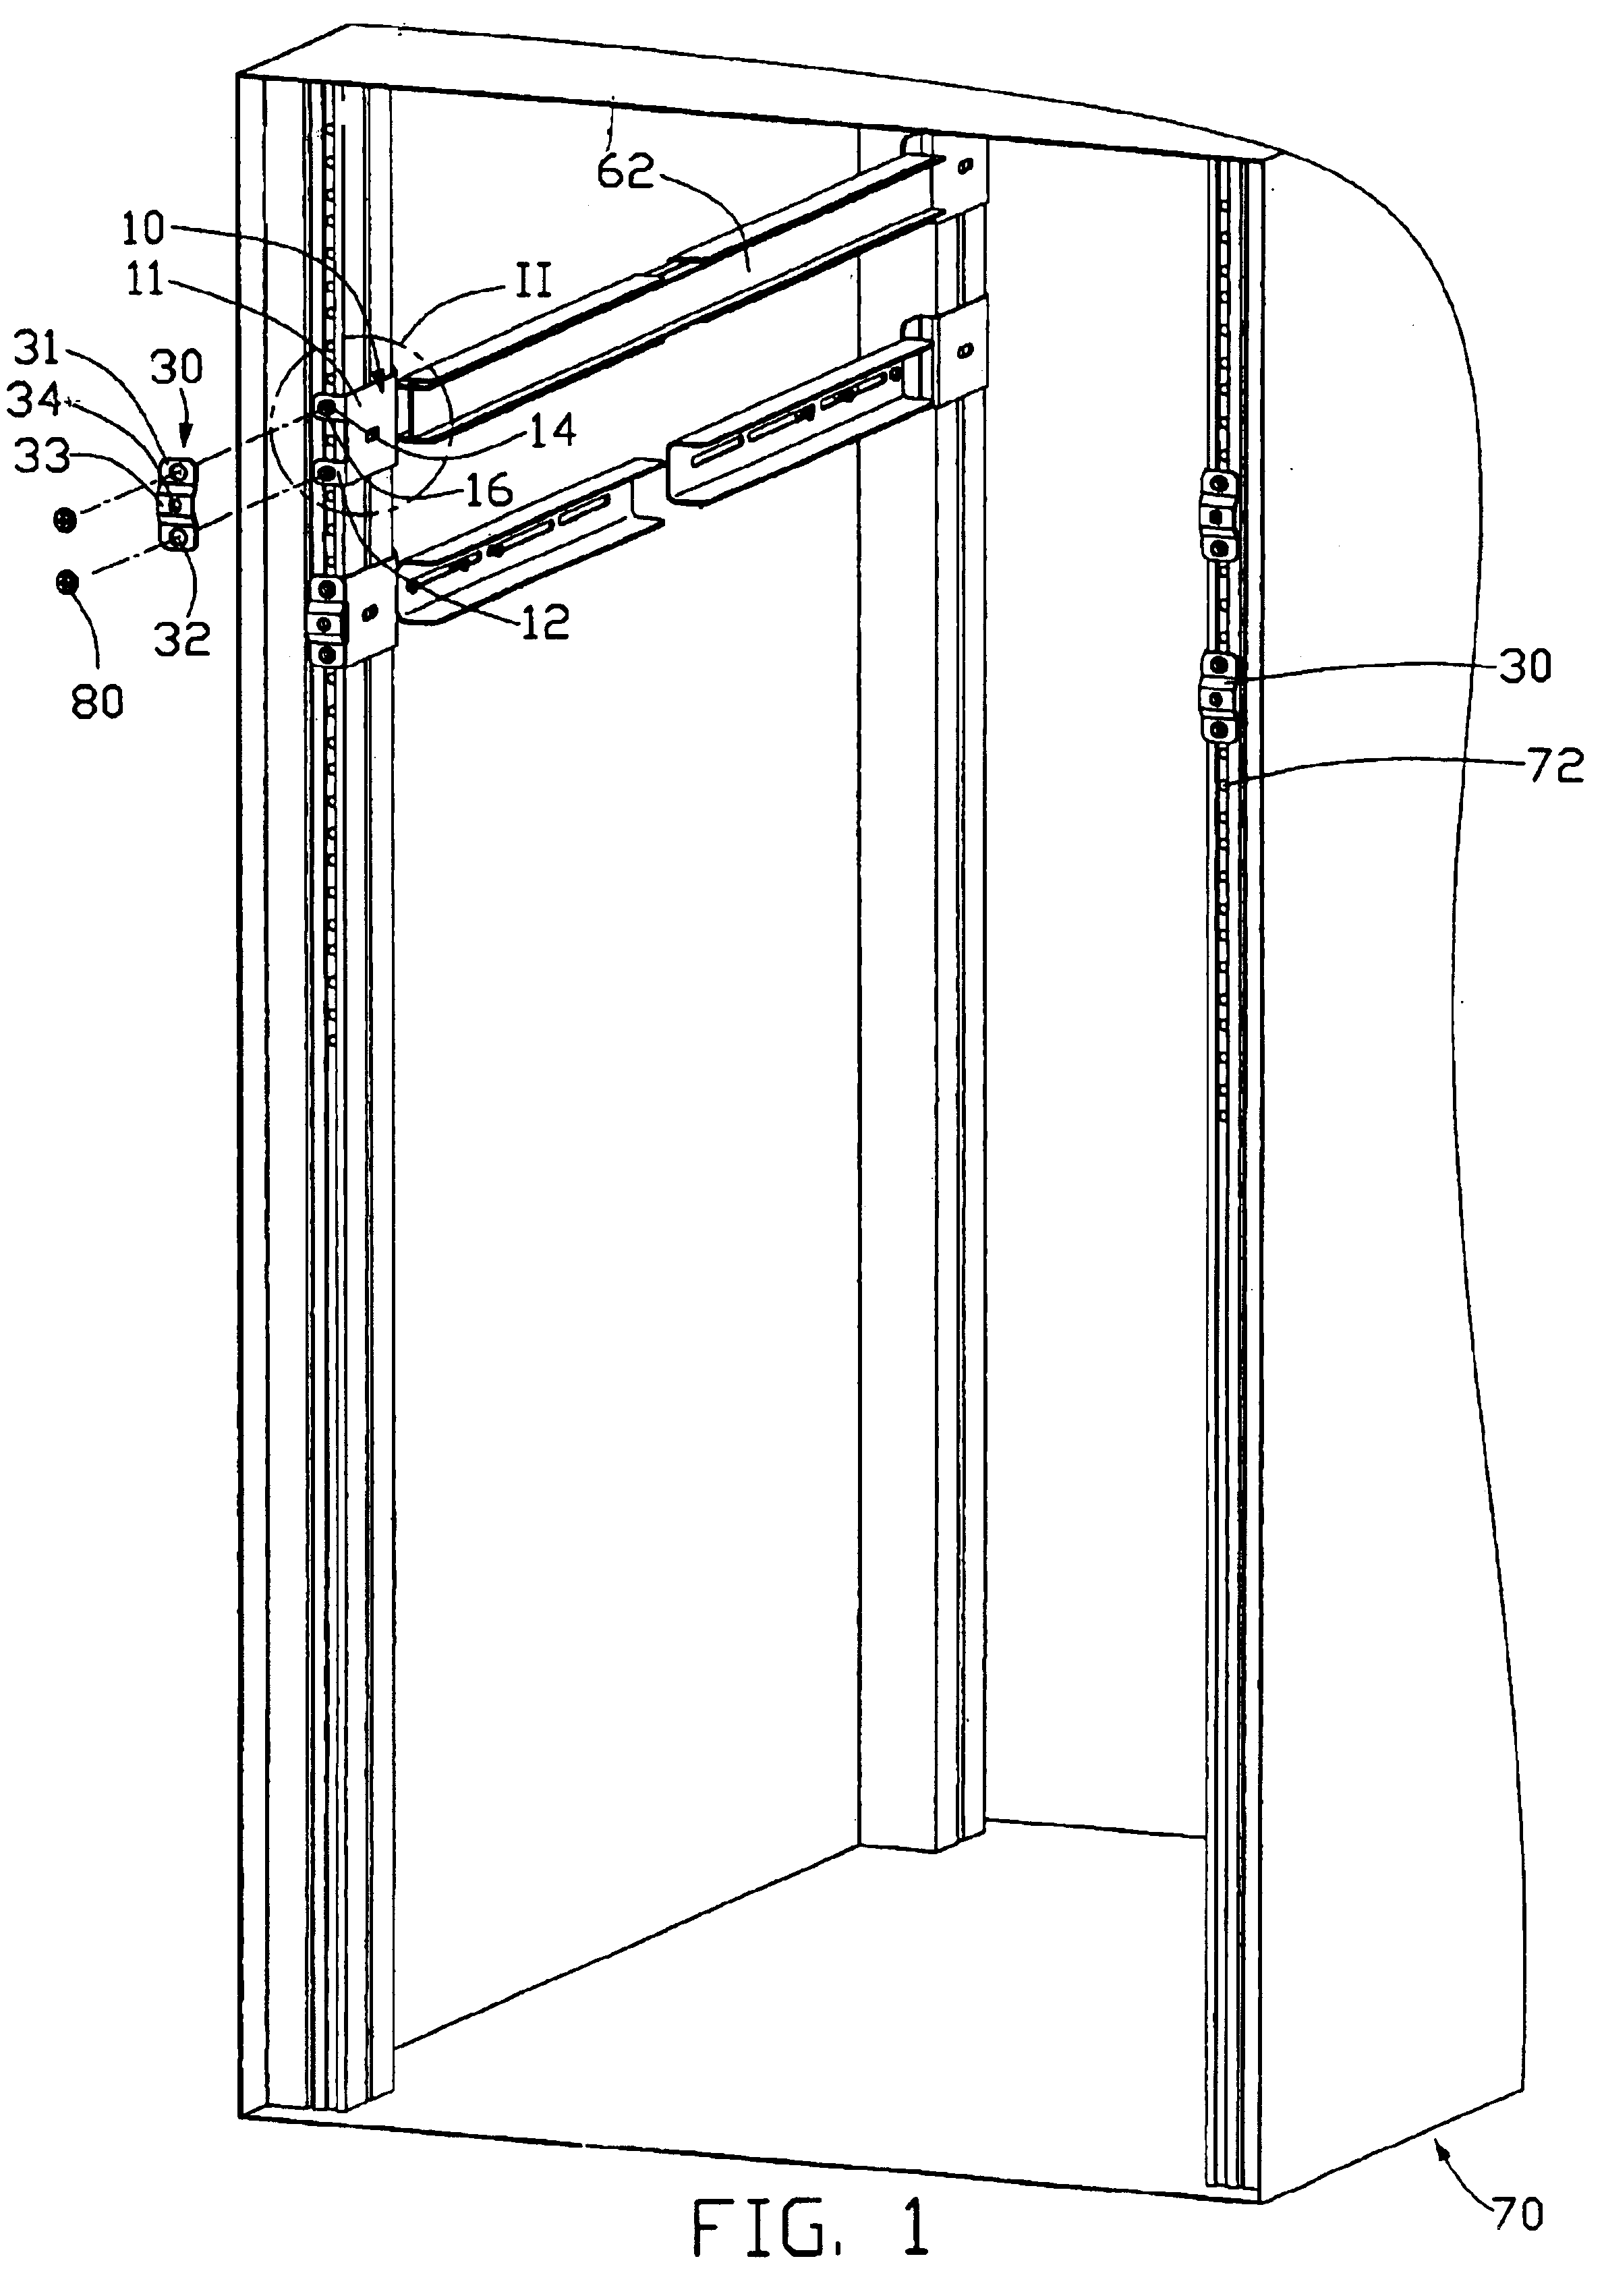 Retaining assembly for rack cabinet